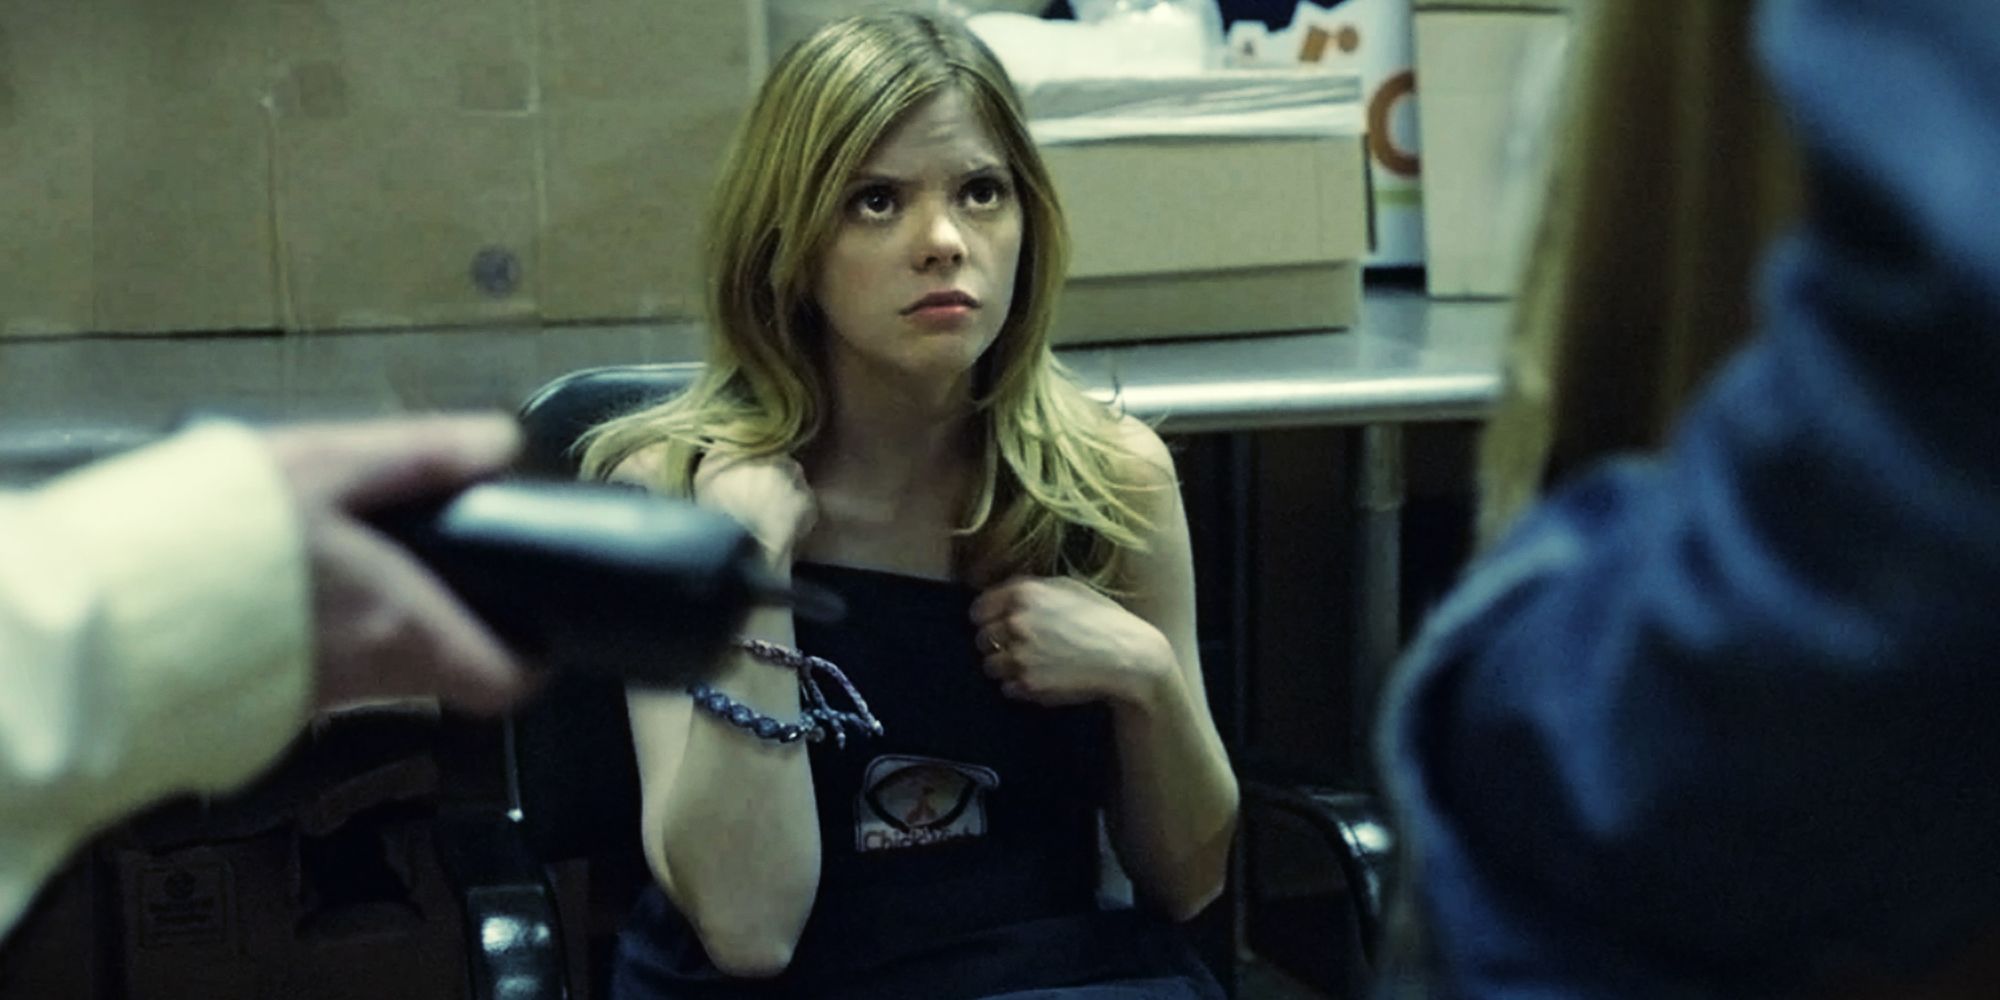 Dreama Walker as Becky sitting in a chair in front of two people in Compliance